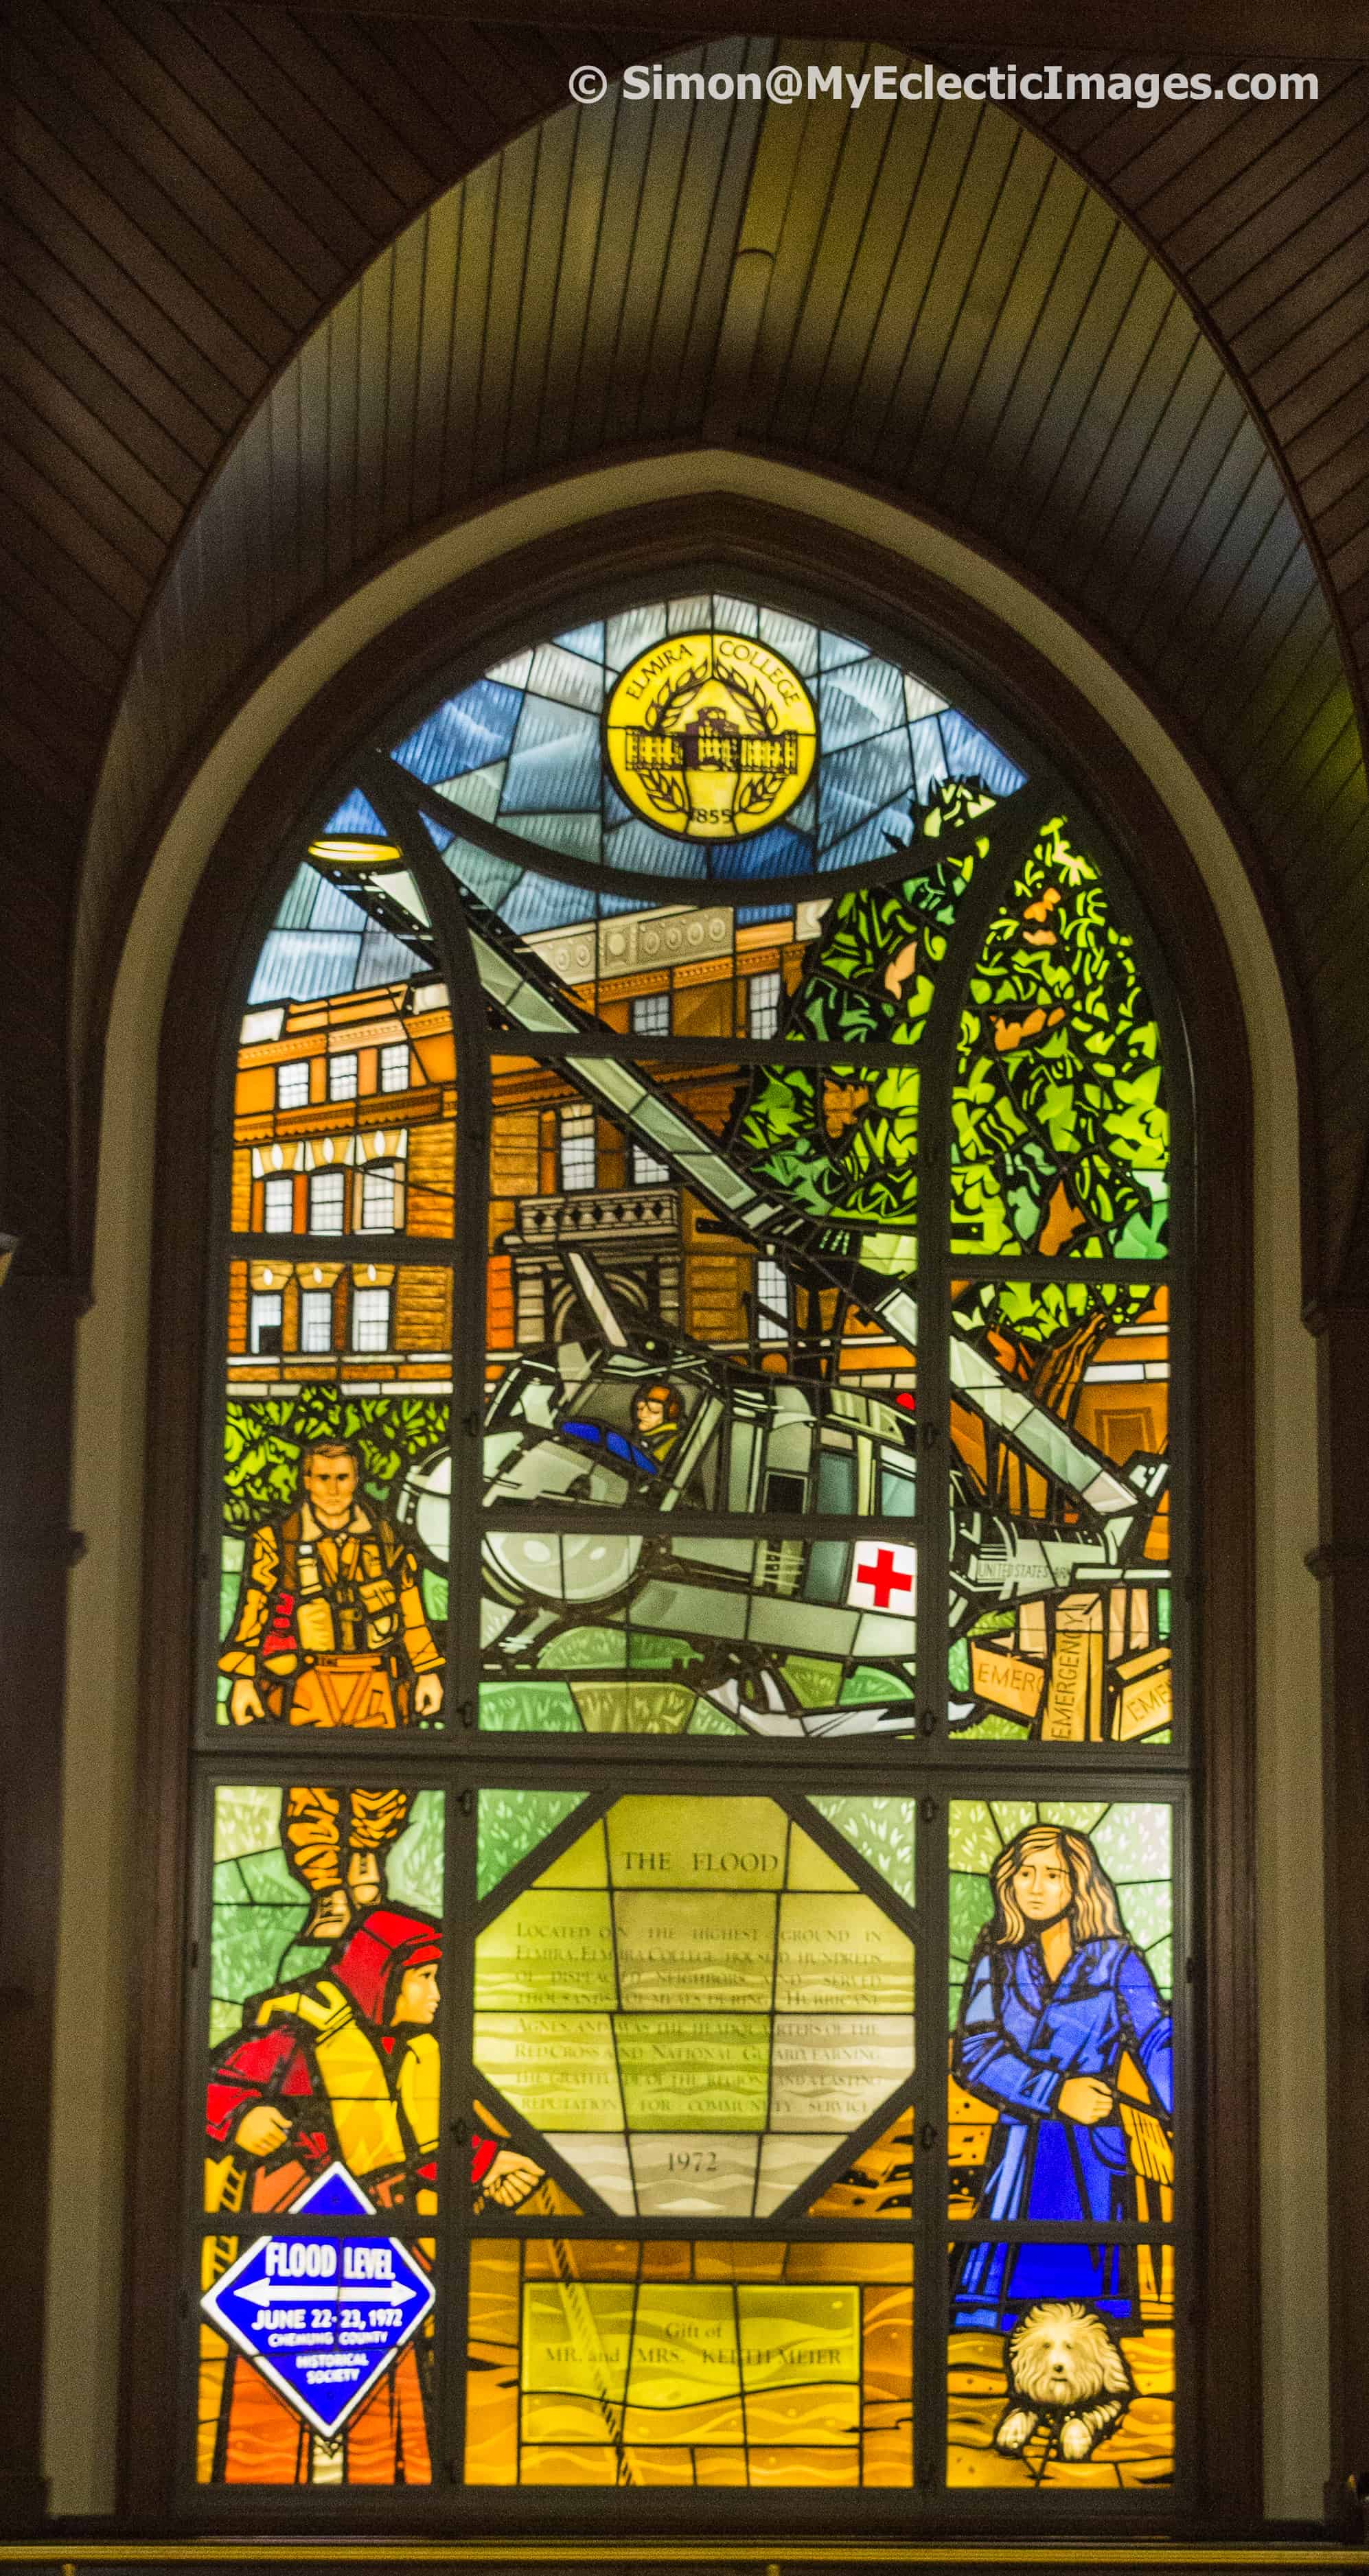 Stained glass depicting the flood of 1972 in Elmira